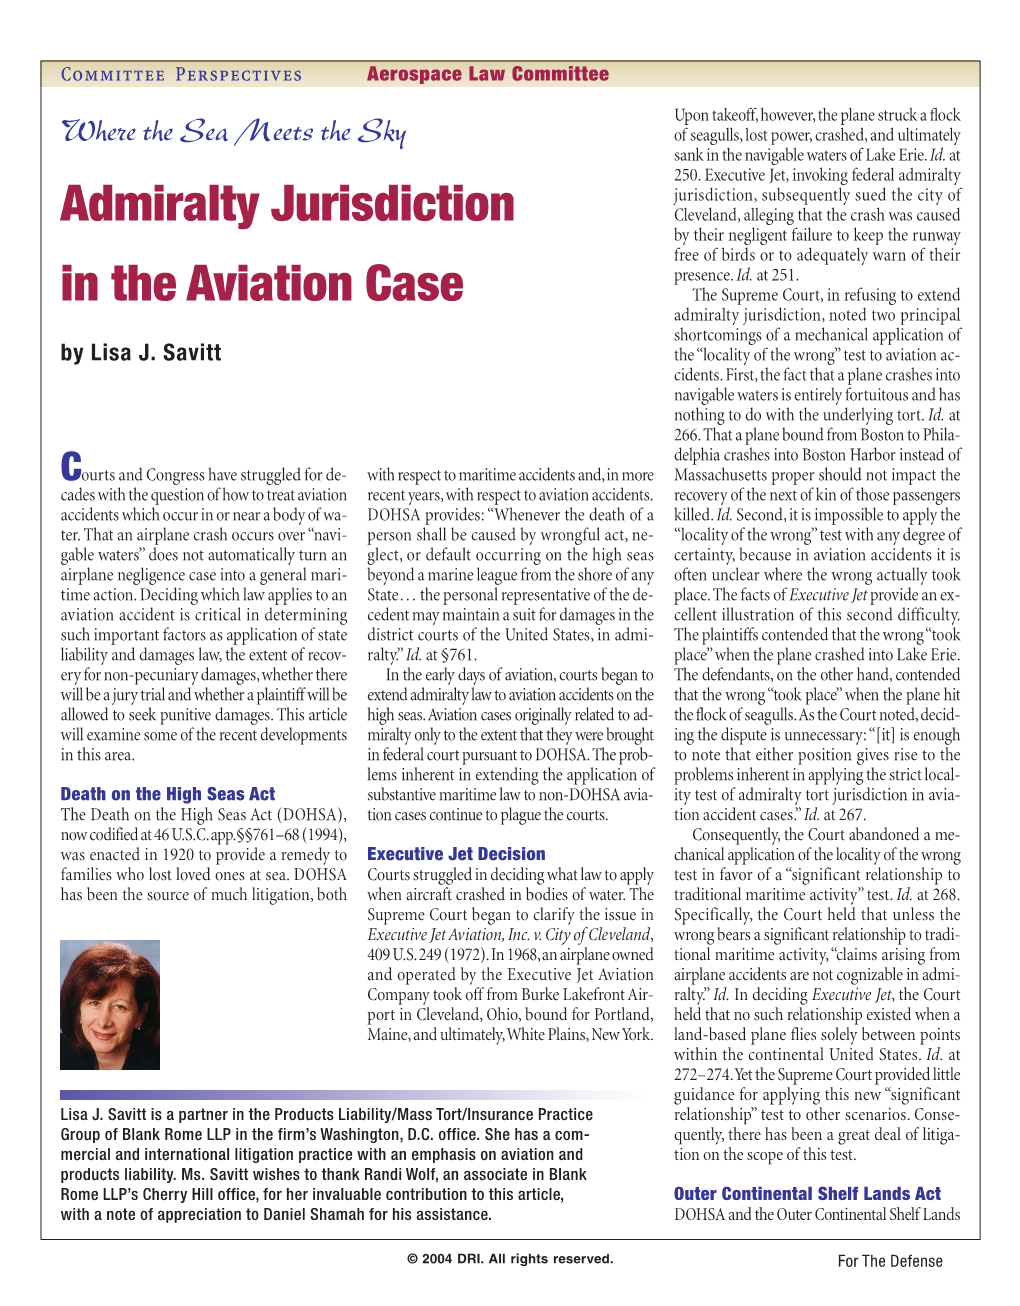 Admiralty Jurisdiction in the Aviation Case